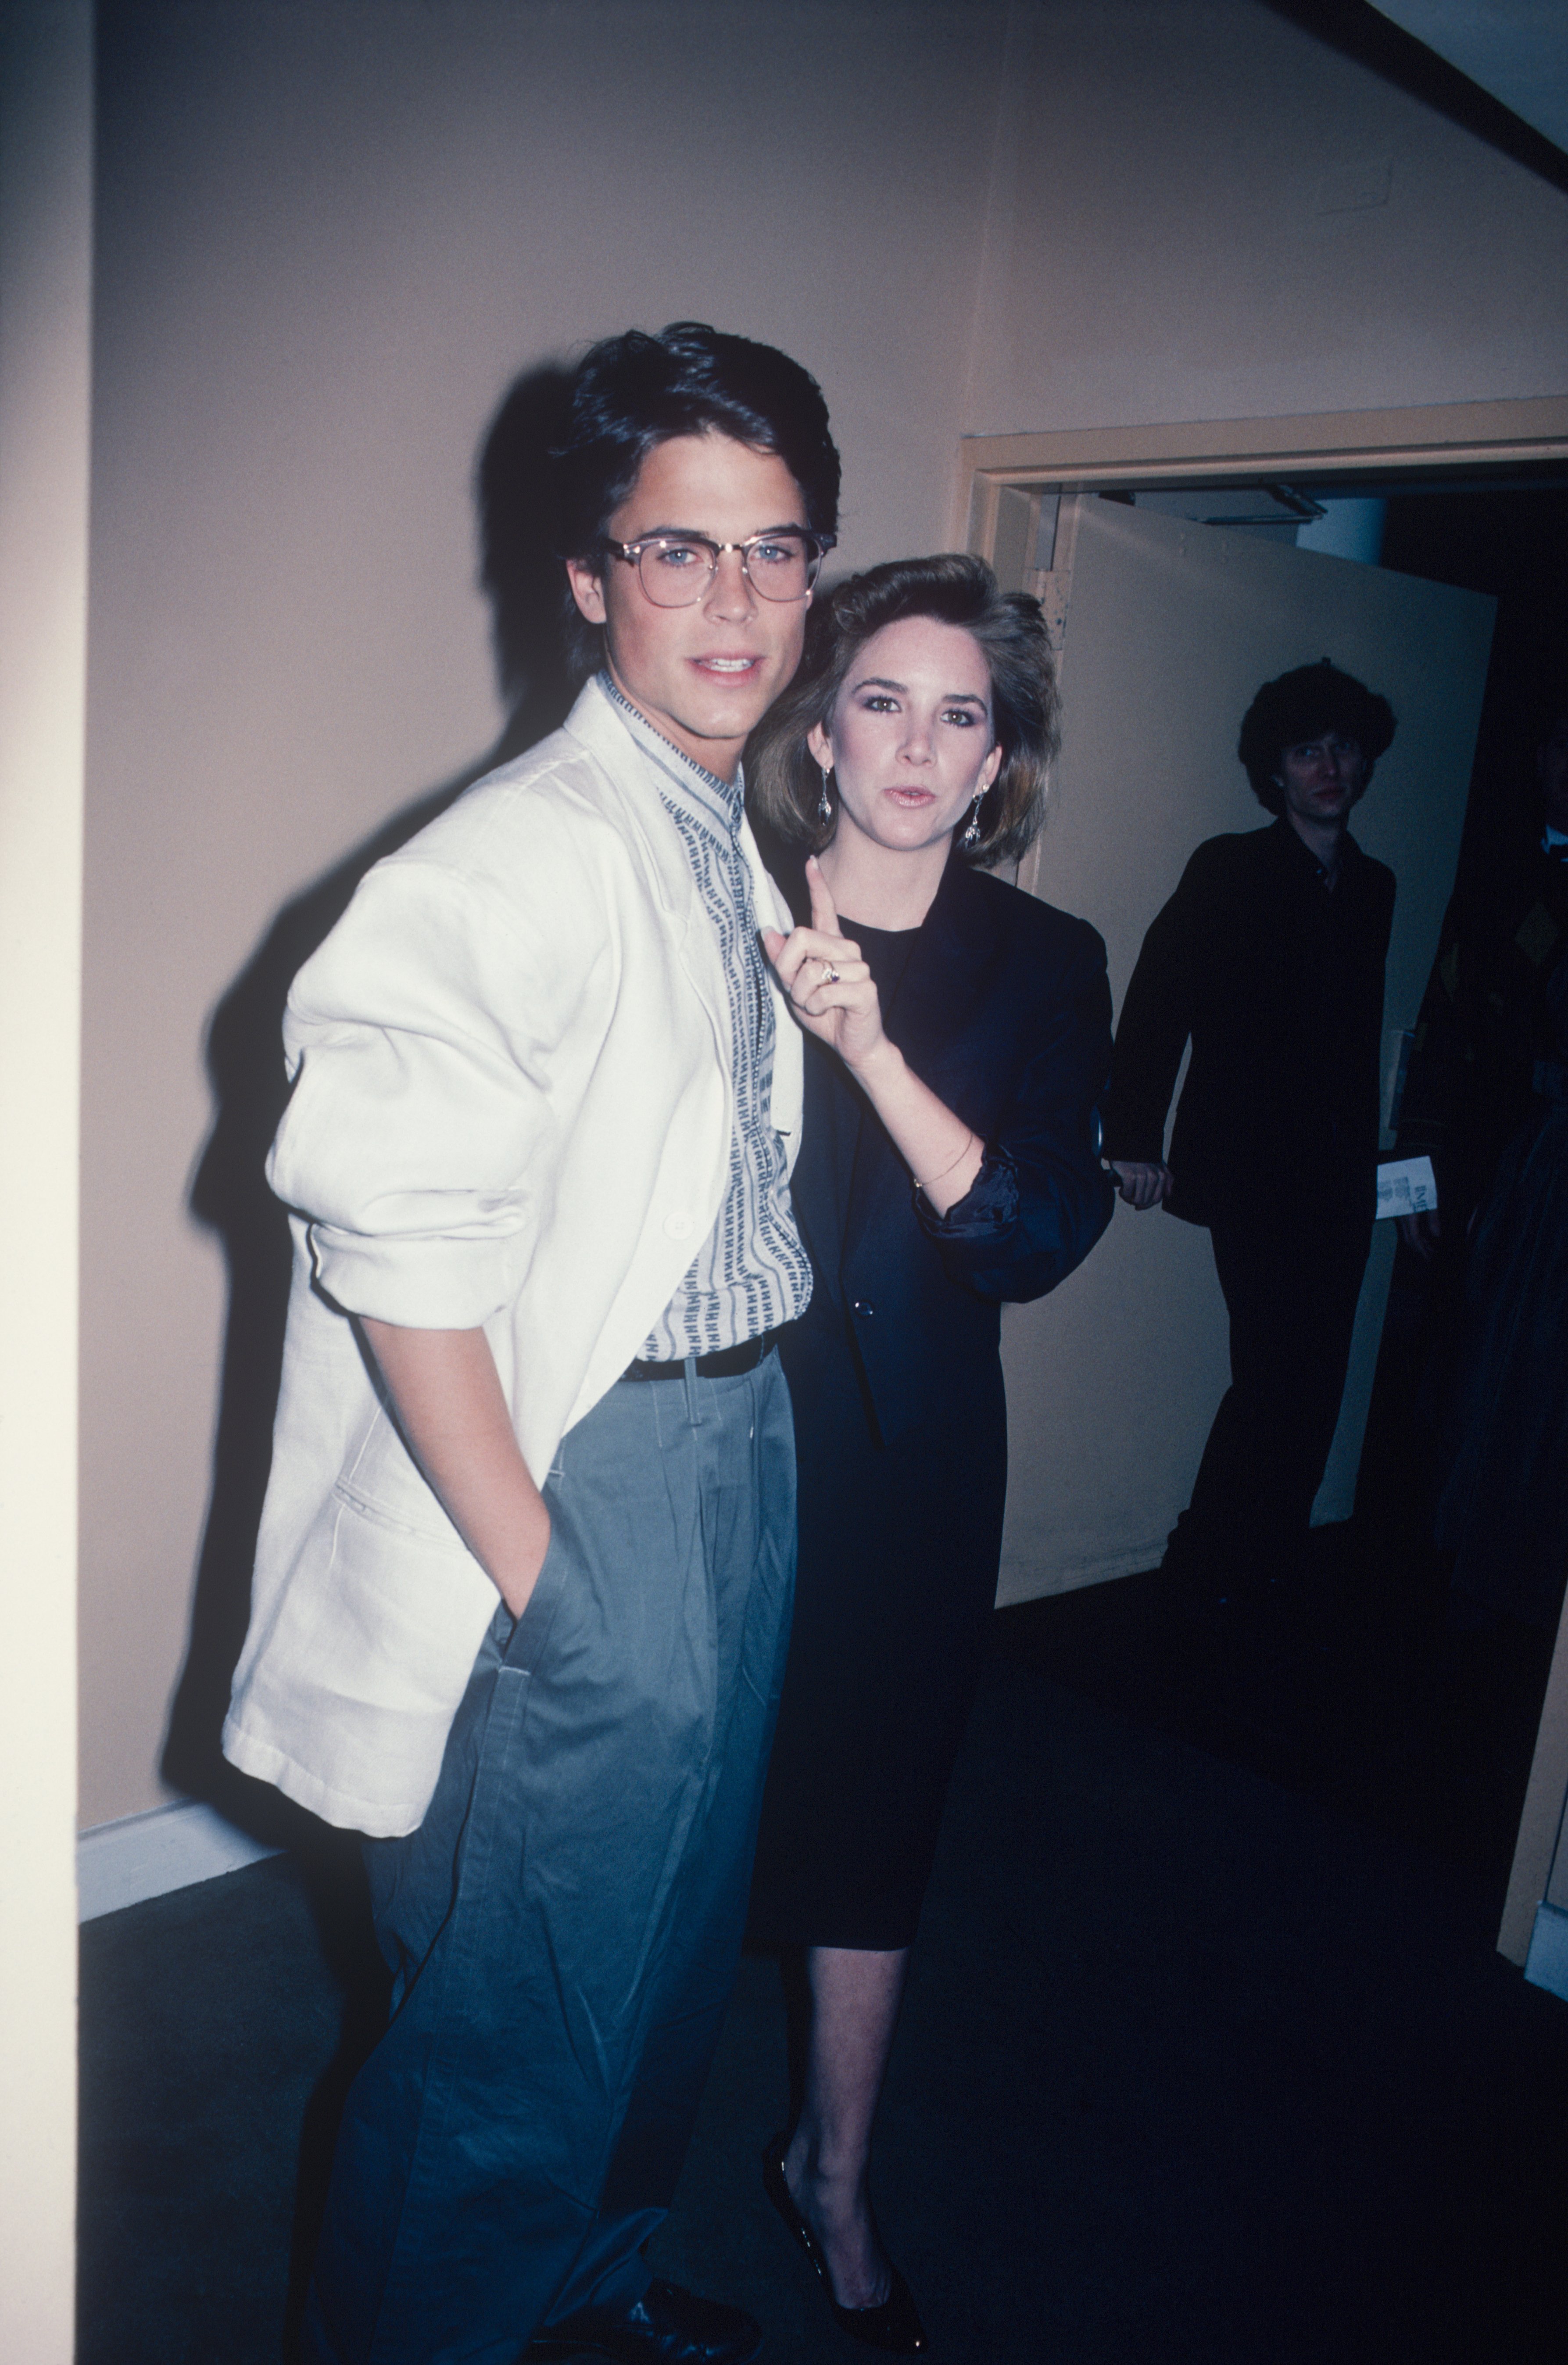 Melissa Gilbert with Rob Lowe backstage; circa 1970; New York. | Source: Getty Images